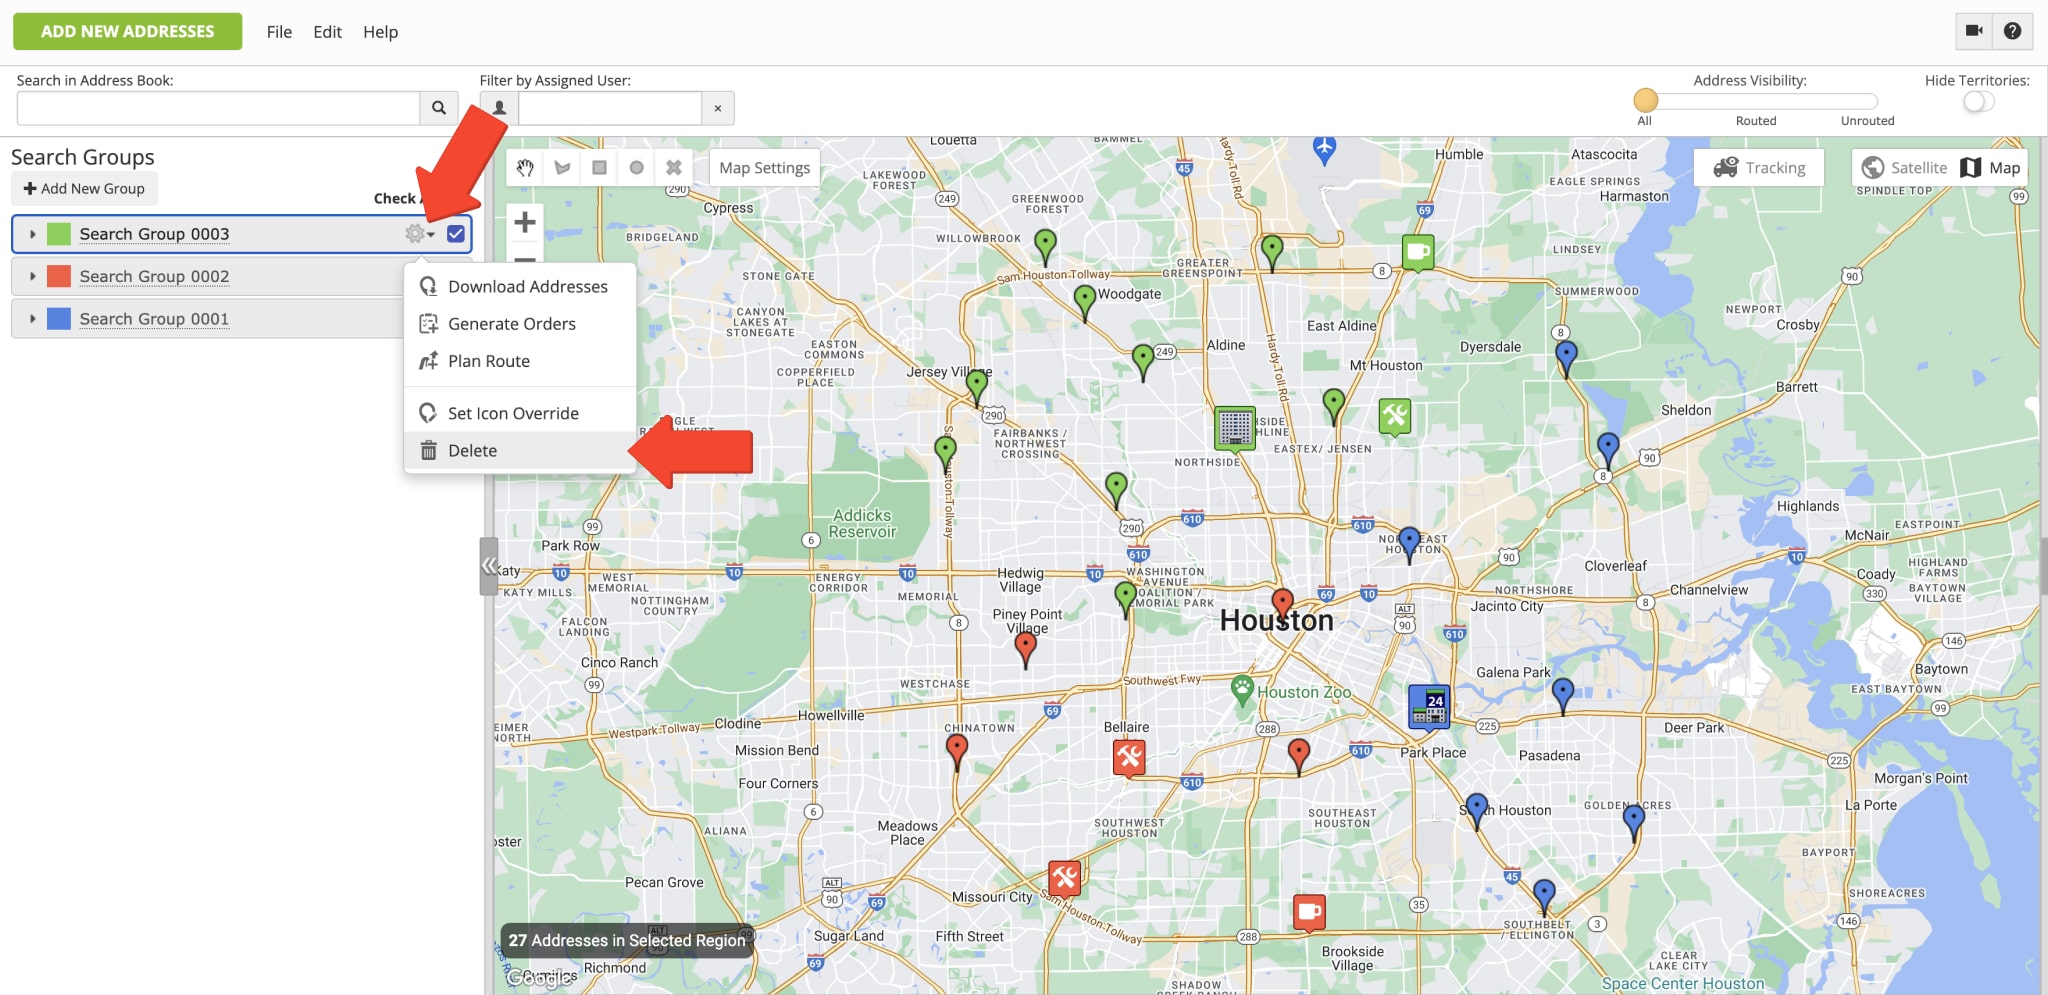 Delete Search Groups on the Address Book Map for last mile route planning and optimization.